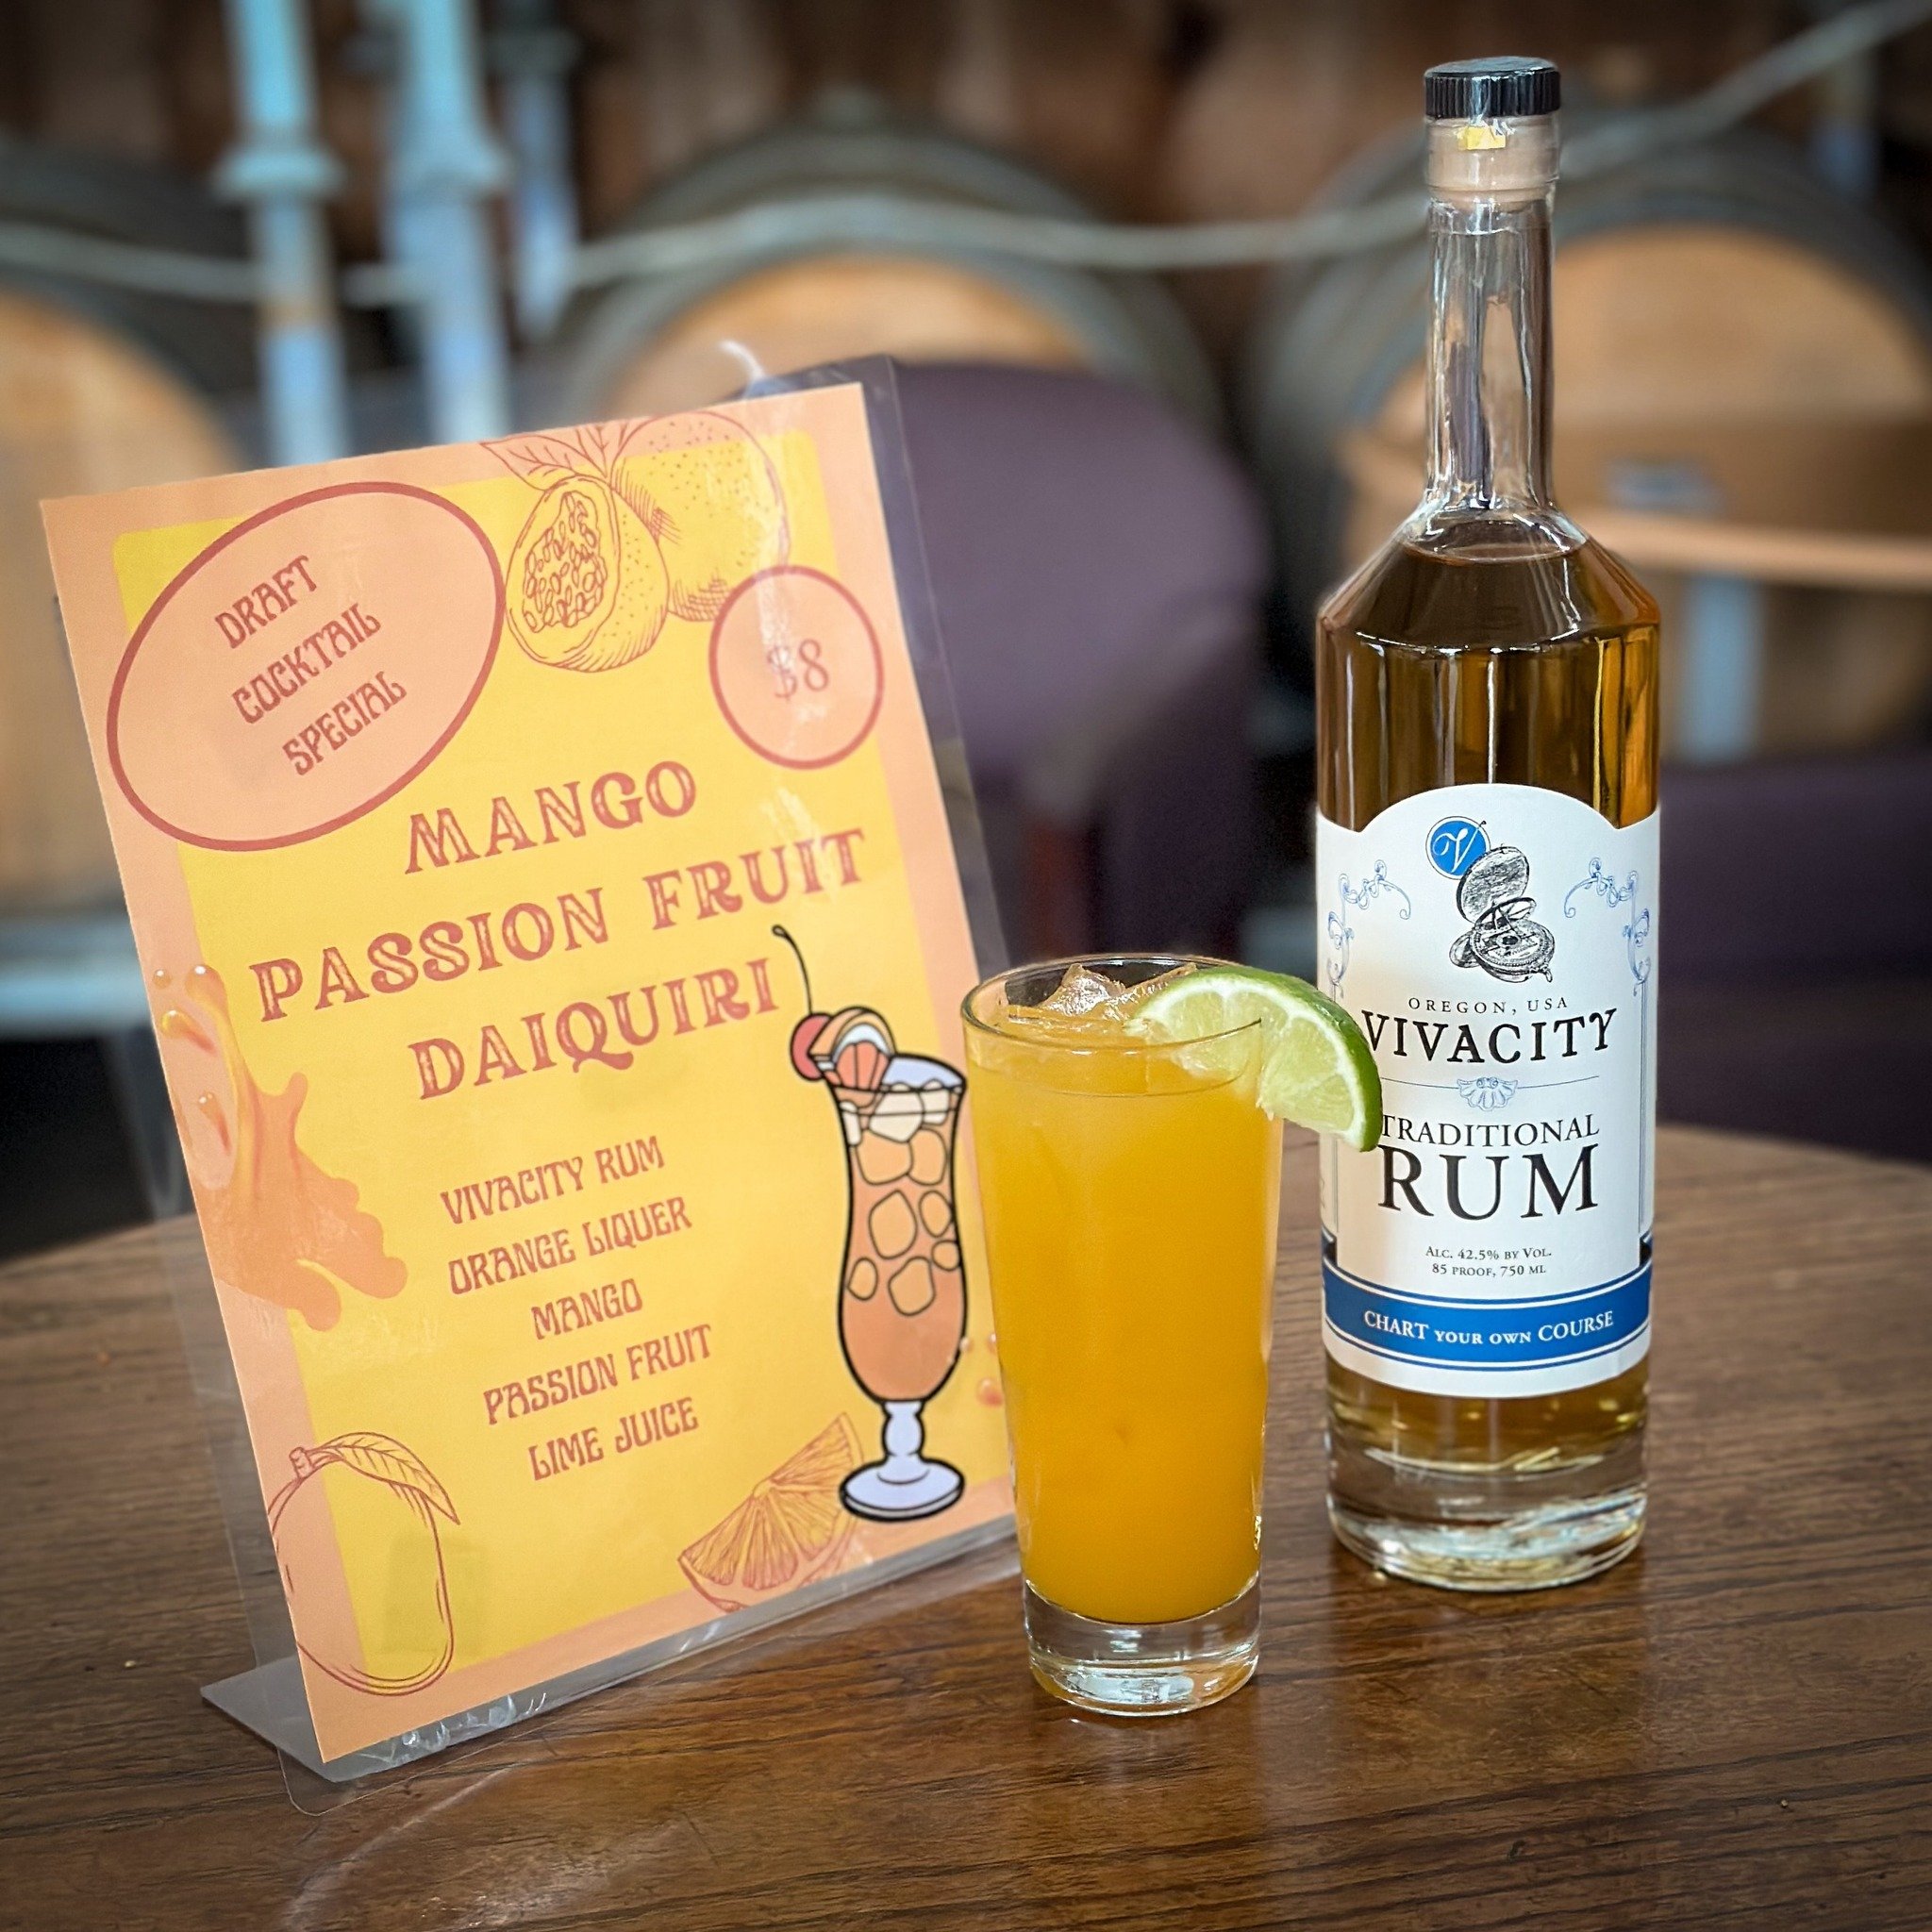 This week&rsquo;s draft cocktail special is Mango Passion Fruit Daiquiri. A perfect drink for our upcoming warmer weather! 🍹